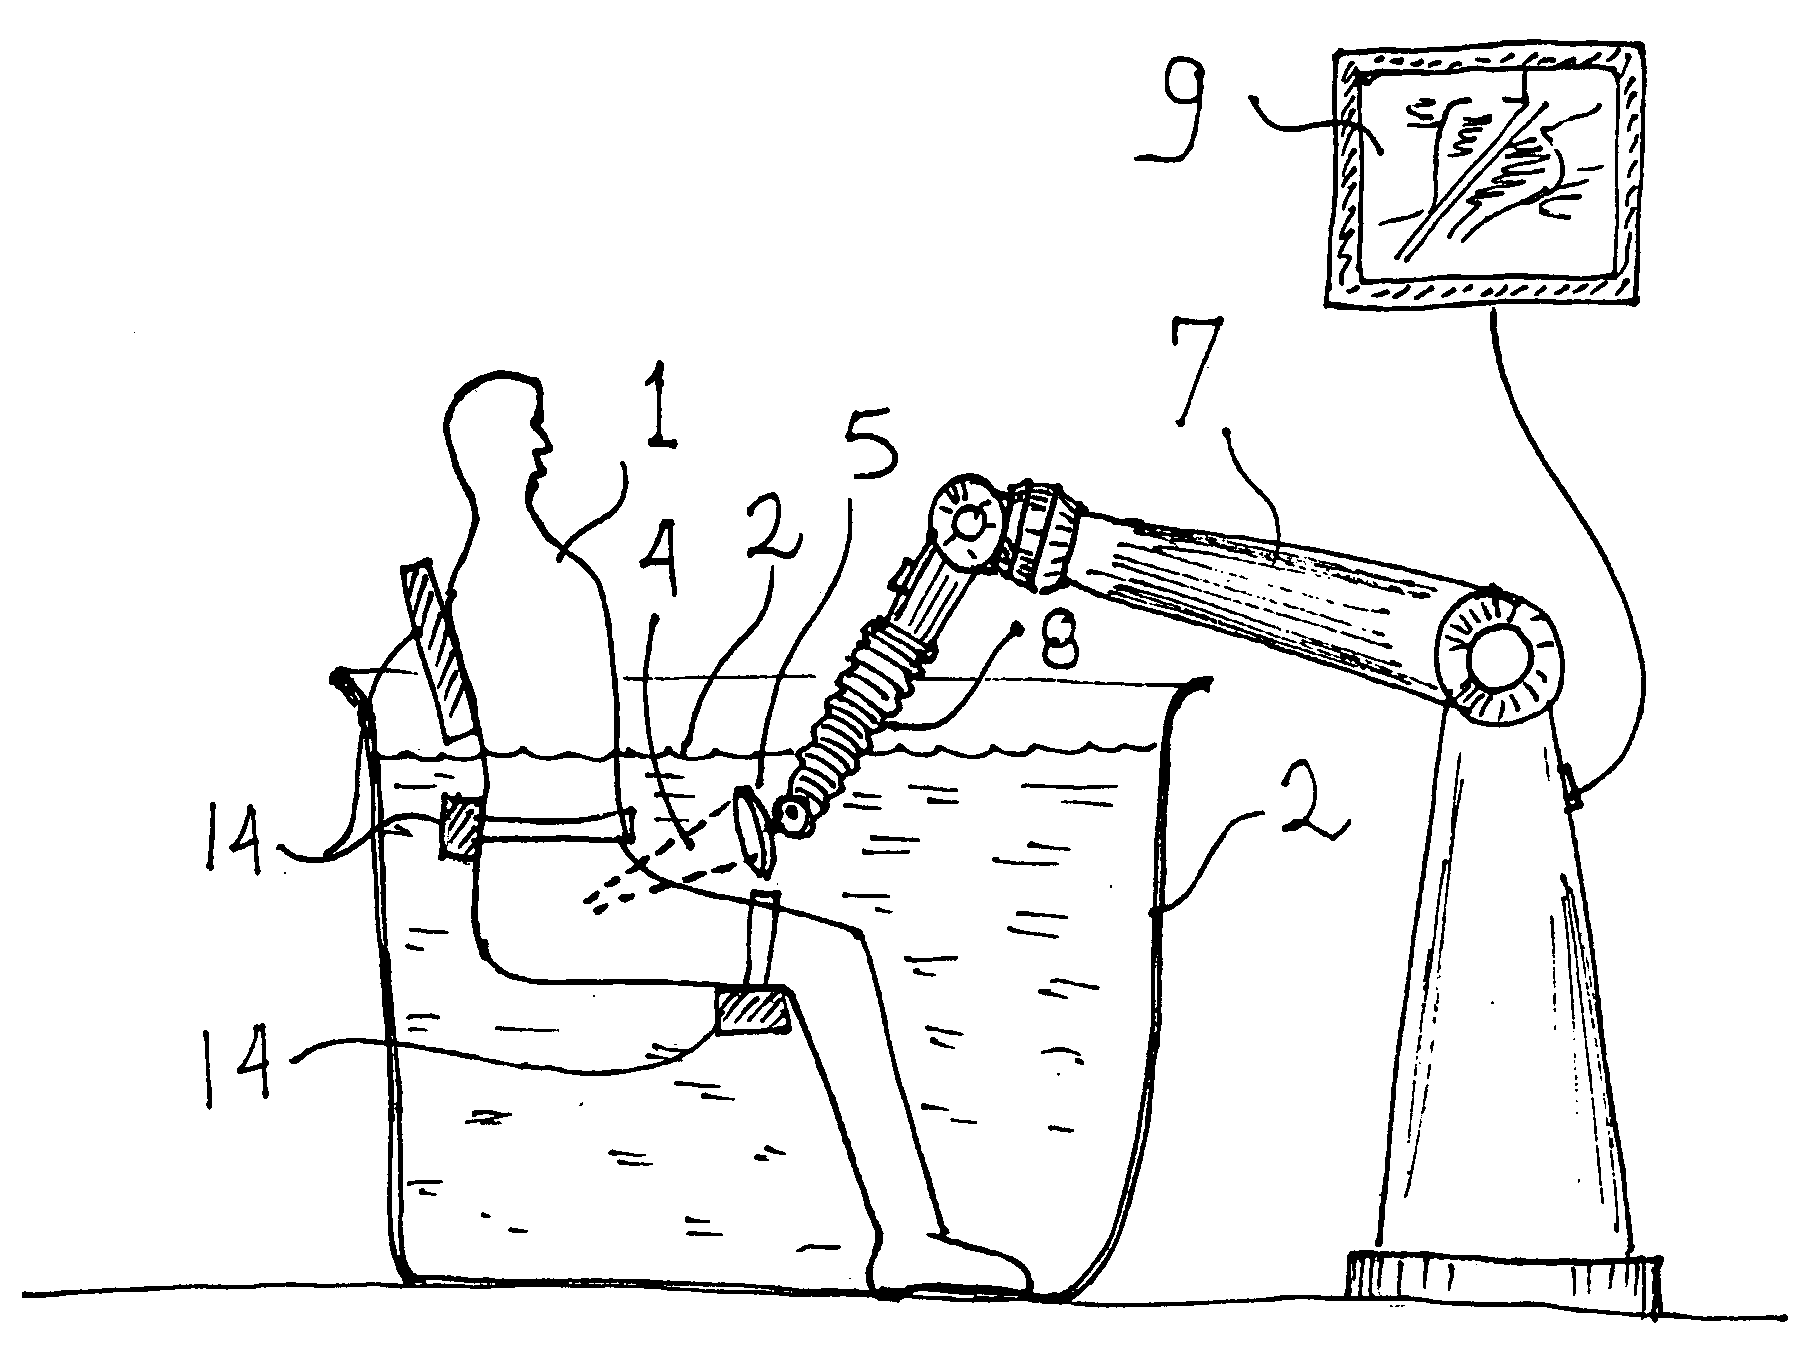 System for selective ultrasonic ablation